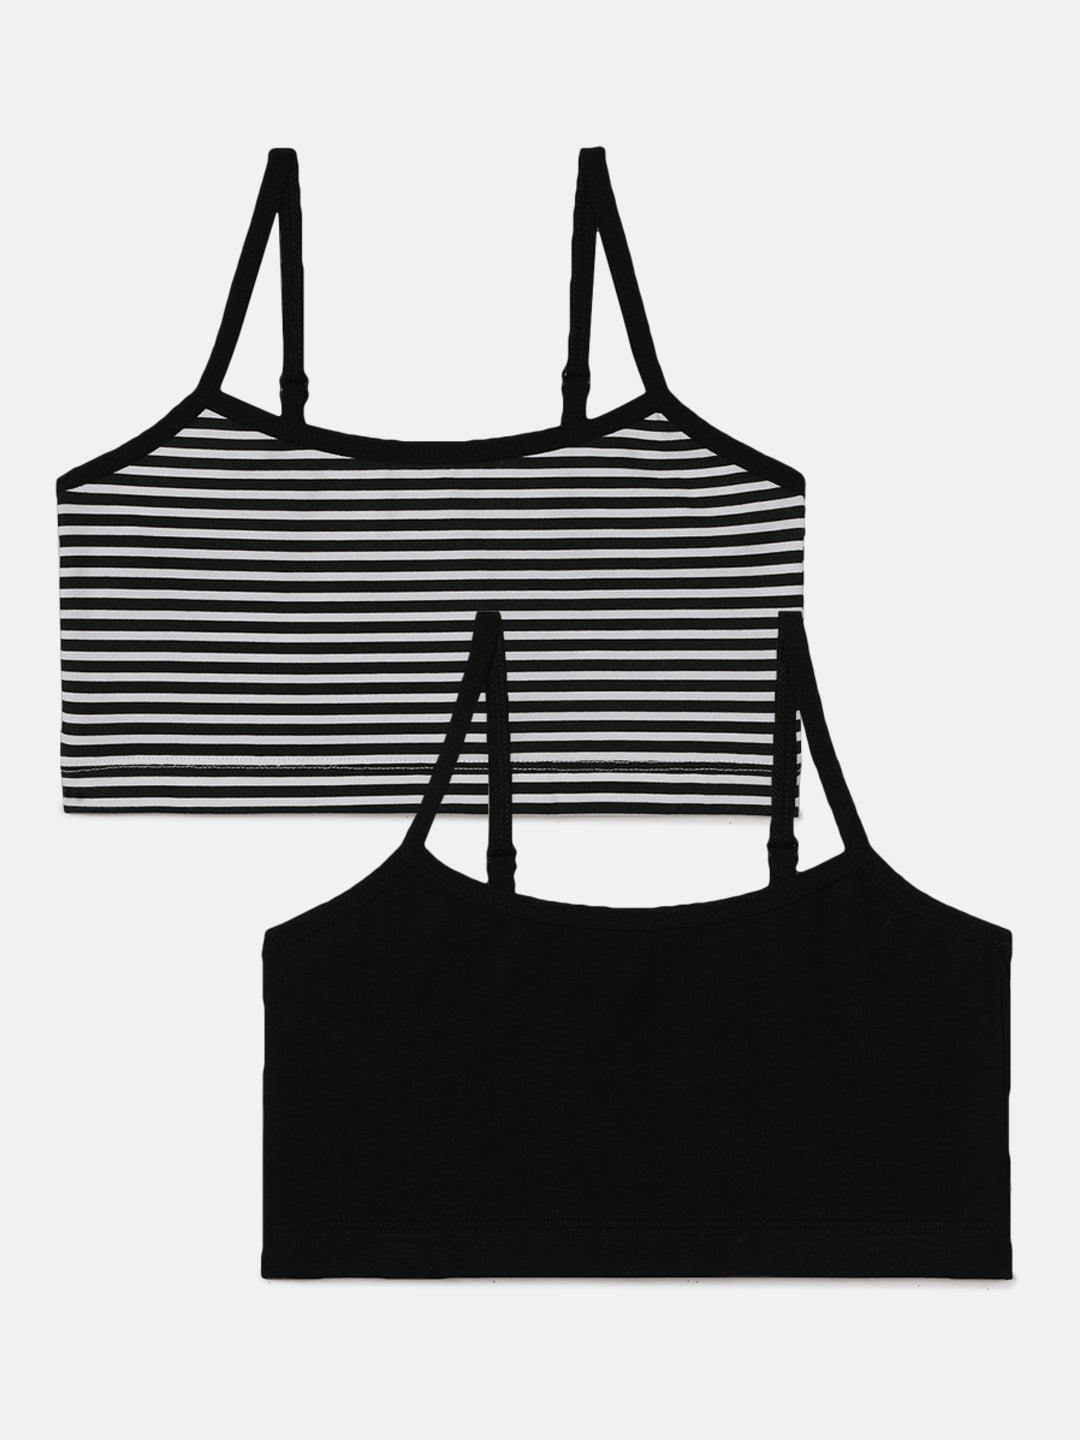 Ying Yang - Striped/Solid Black